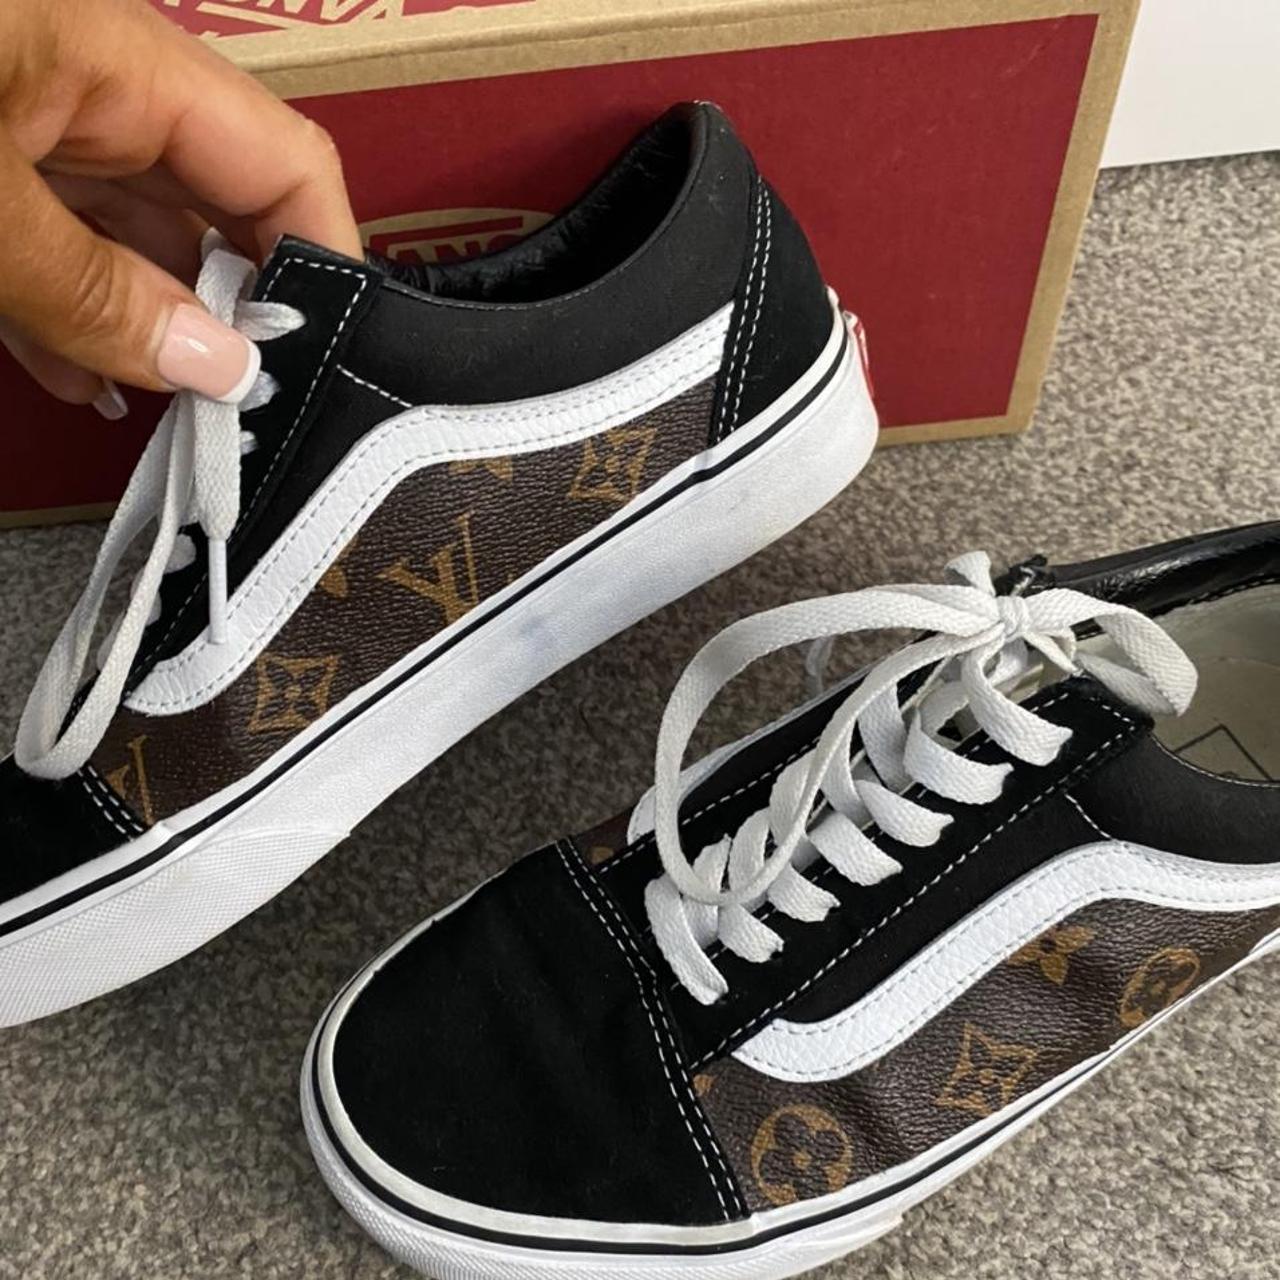 Custom LV vans like new worn a couple of times paid